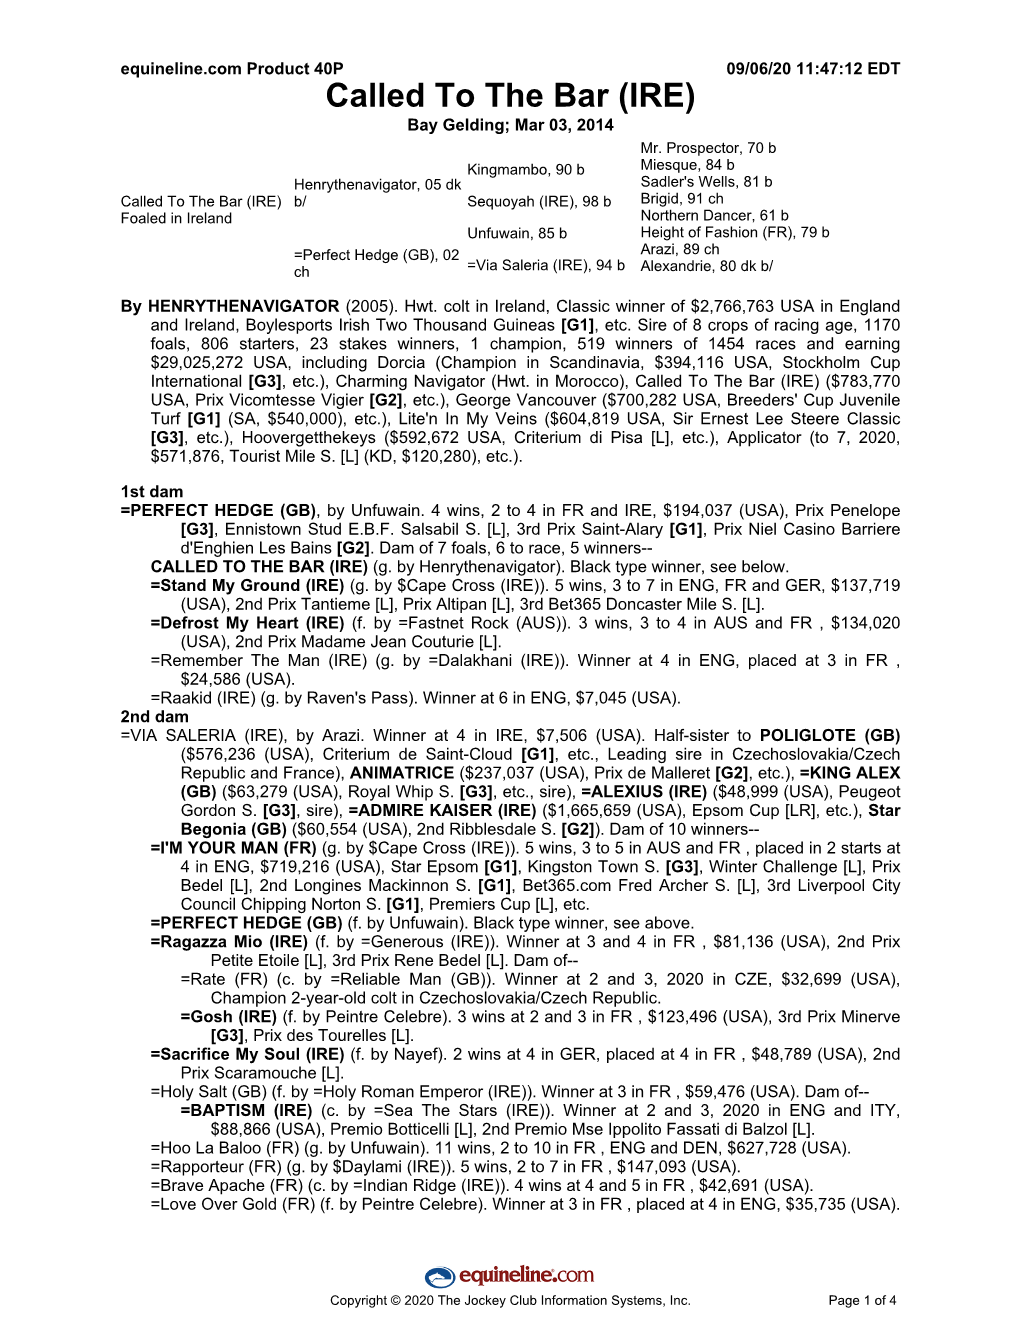 Called to the Bar (IRE) Bay Gelding; Mar 03, 2014 Mr